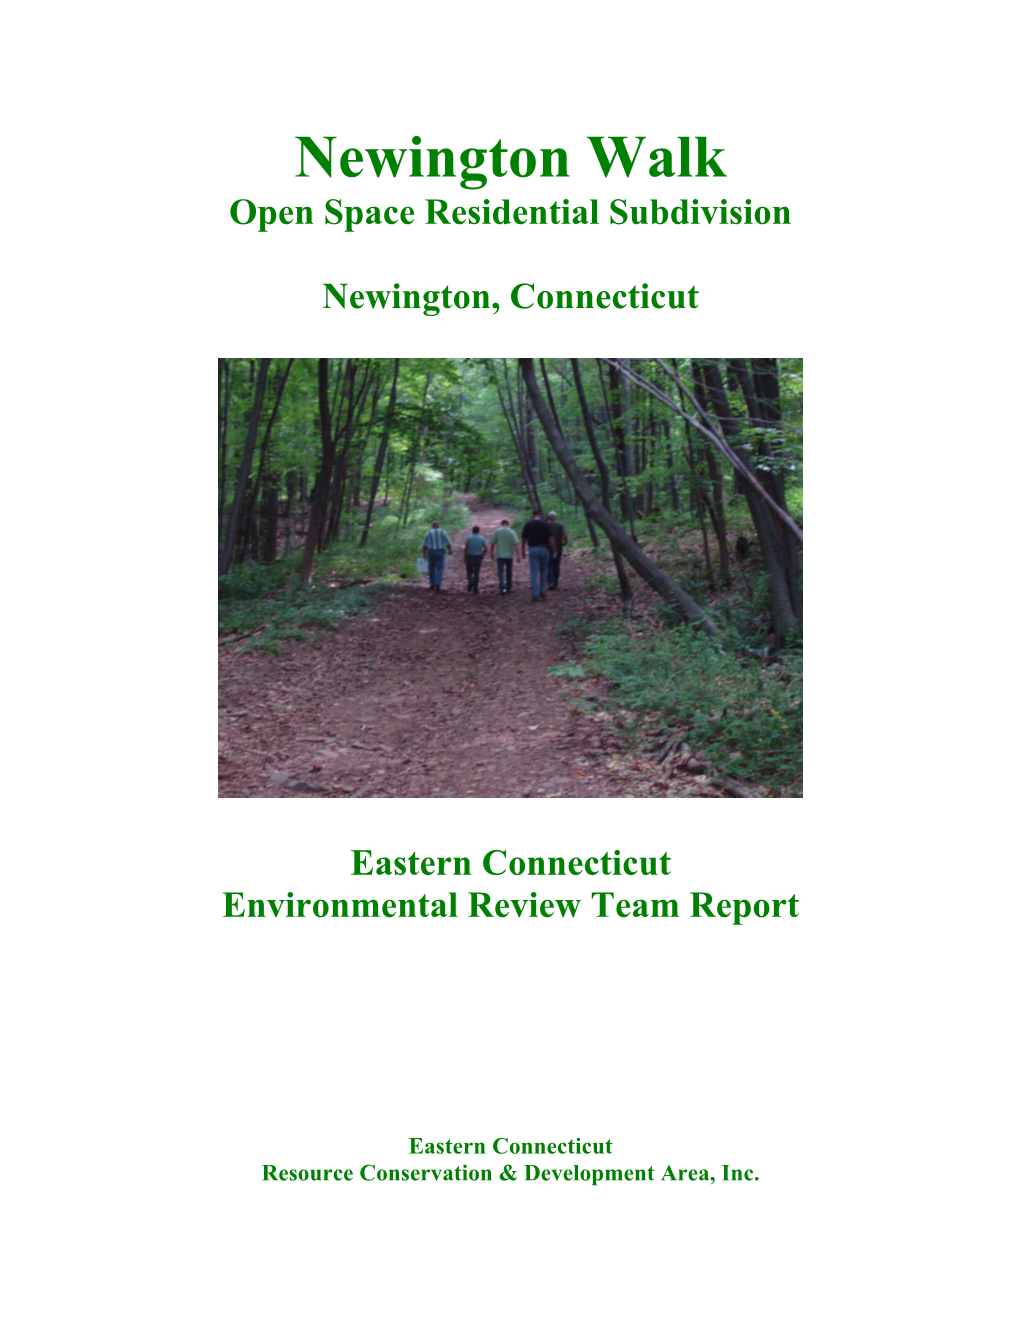 Newington Walk Open Space Residential Subdivision